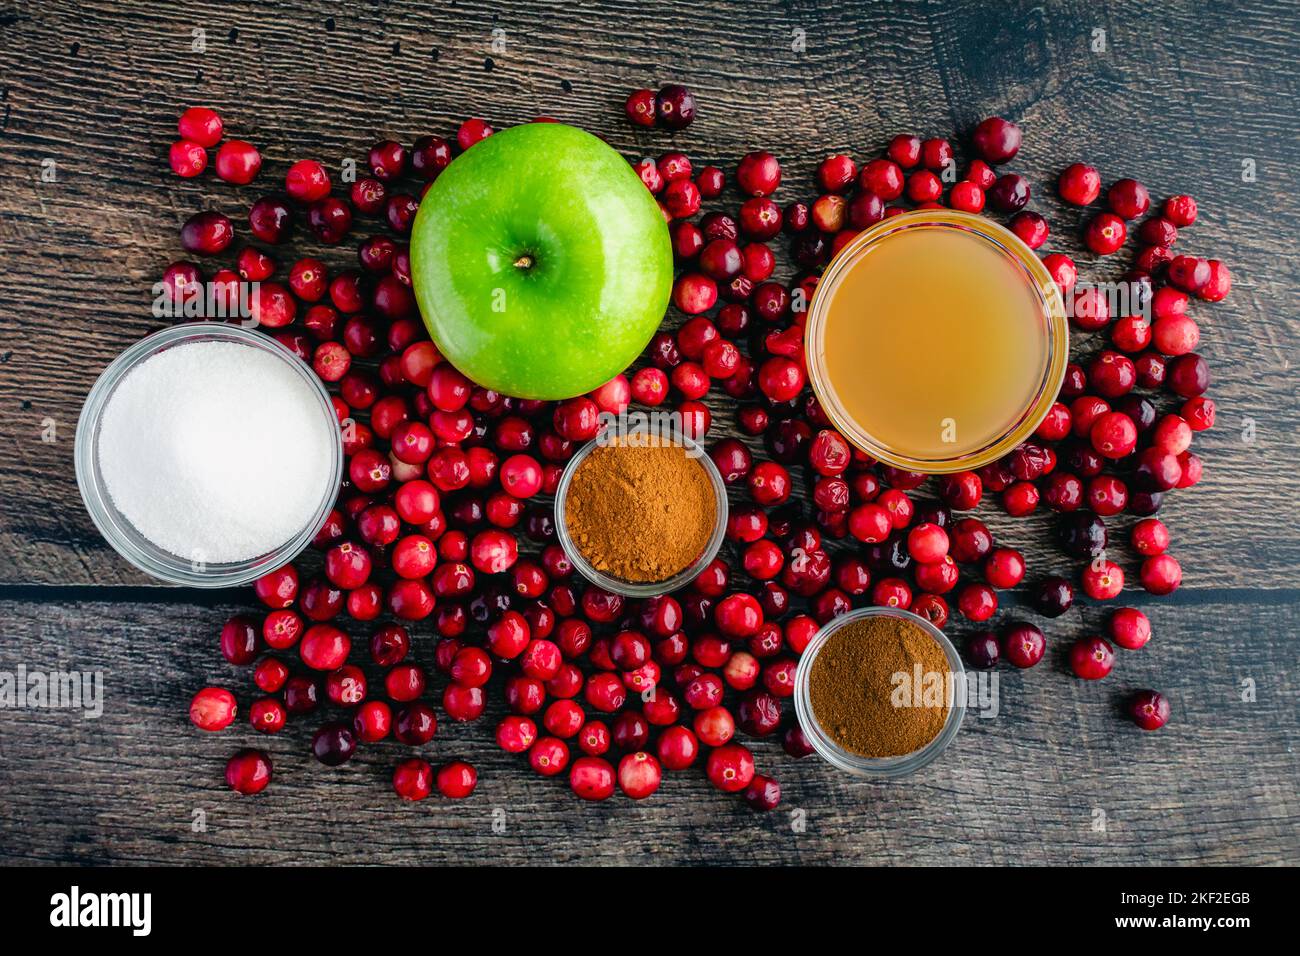 Apple Cranberry Sauce with Cider & Cinnamon on a Wood Background: Fresh cranberries, apples, and other ingredients for cranberry sauce Stock Photo